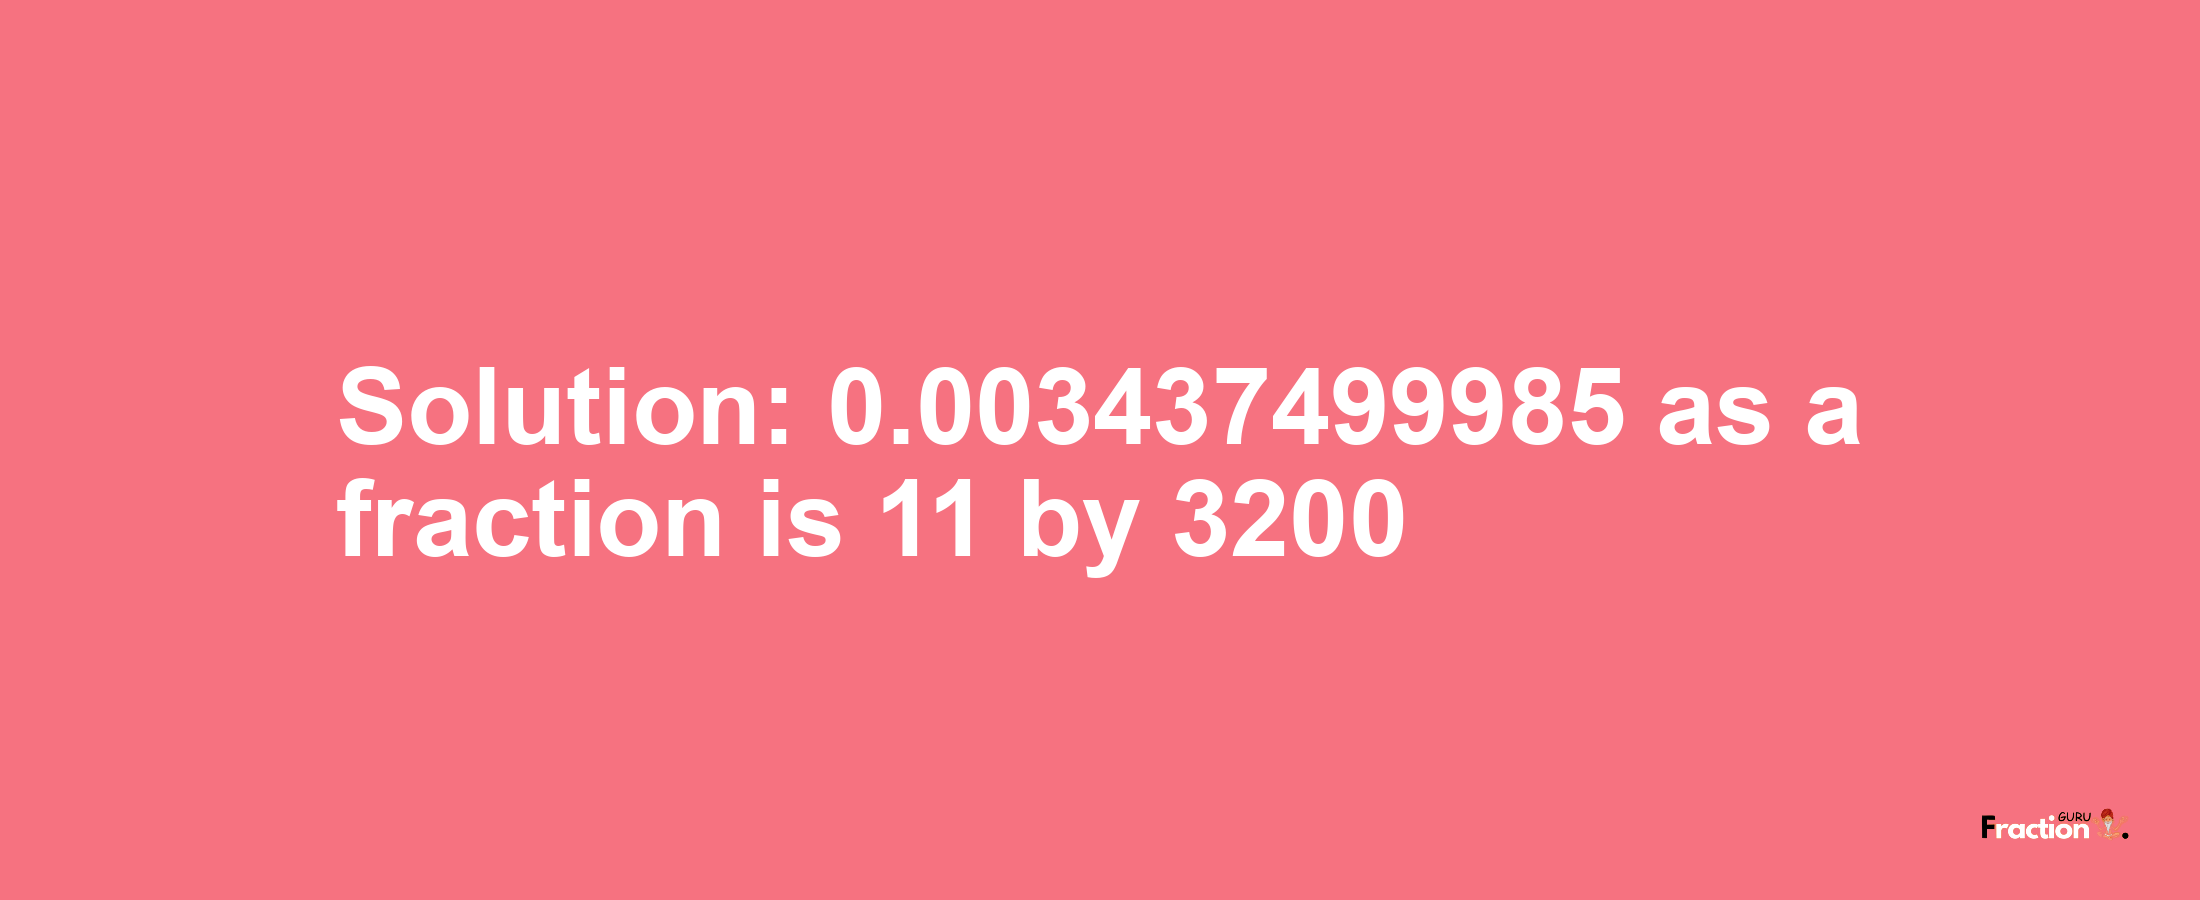 Solution:0.003437499985 as a fraction is 11/3200